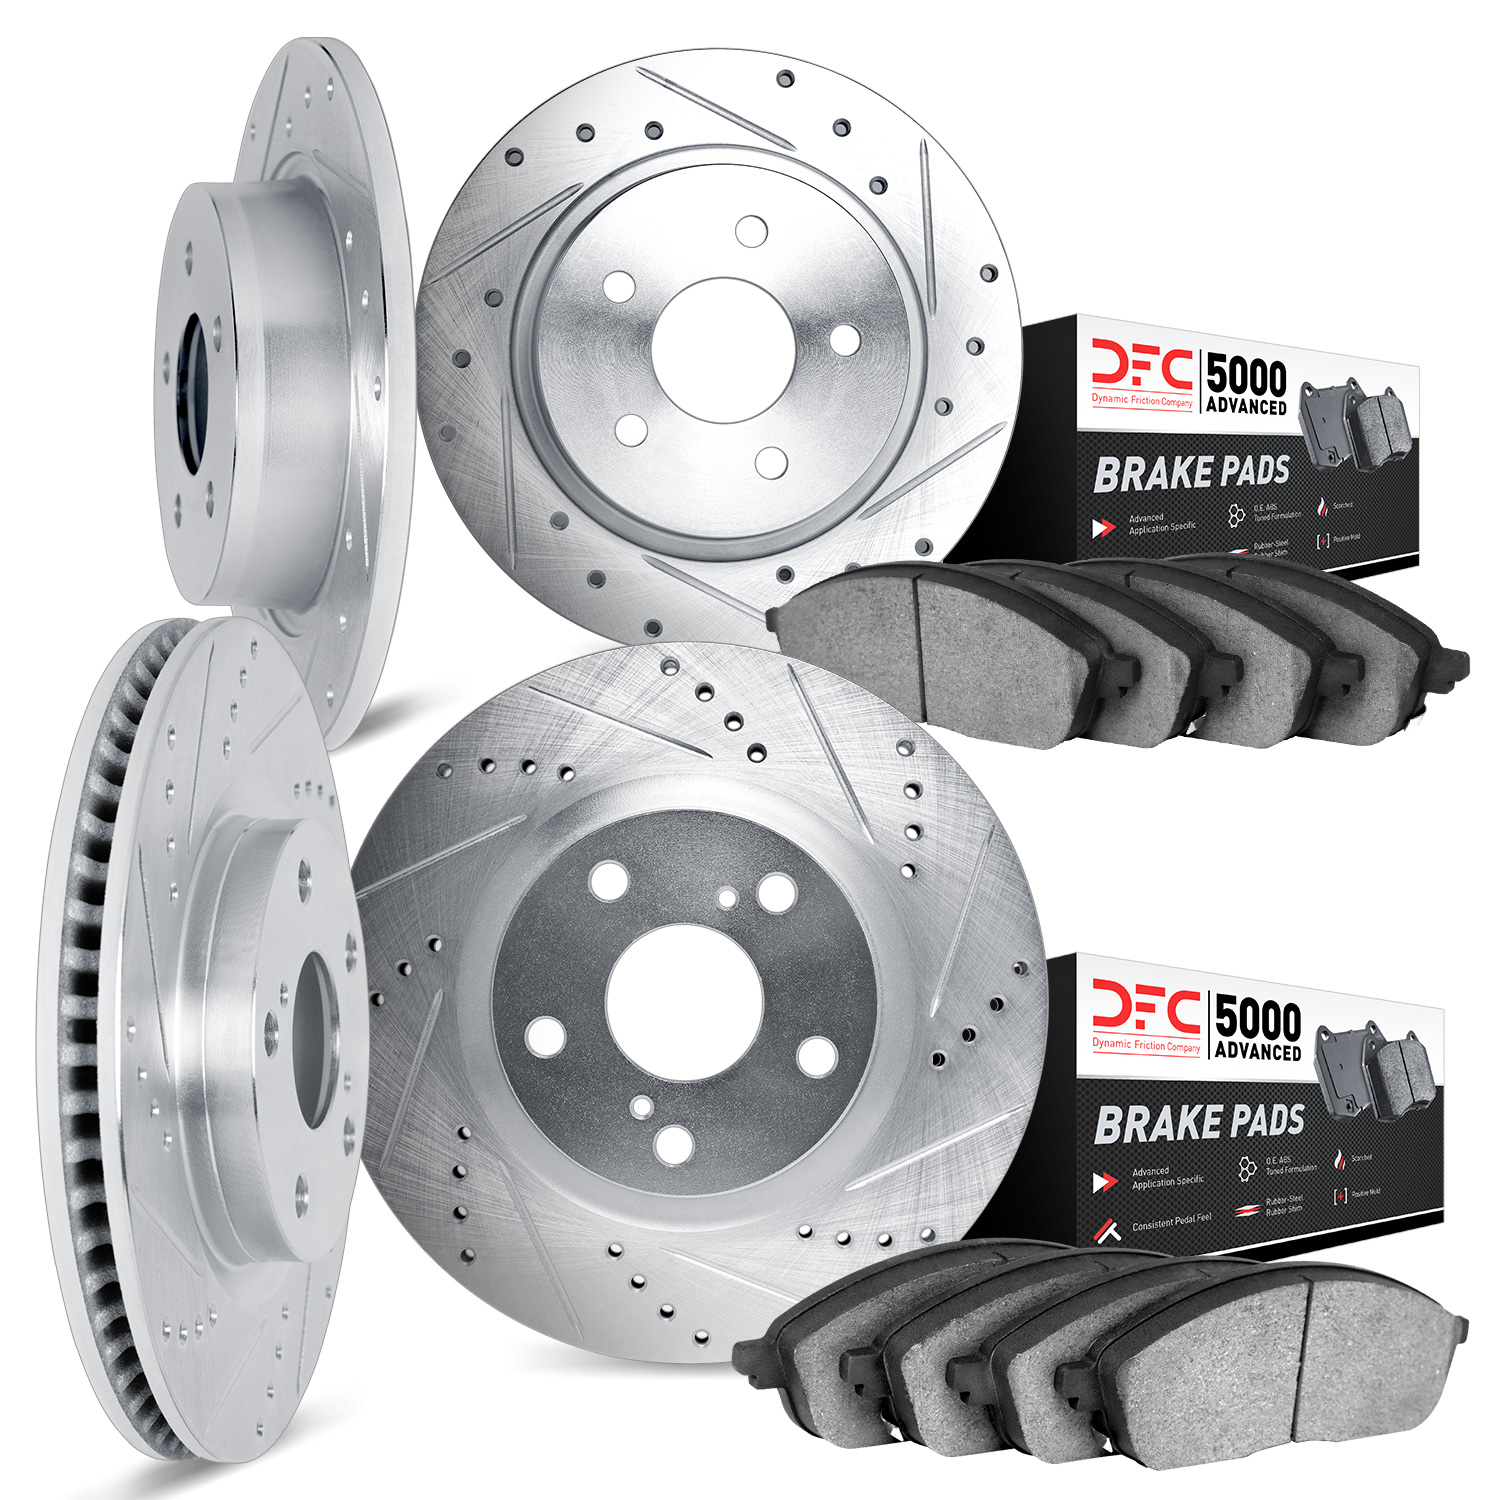 7504-54298 Drilled/Slotted Brake Rotors w/5000 Advanced Brake Pads Kit [Silver], 2015-2020 Ford/Lincoln/Mercury/Mazda, Position: